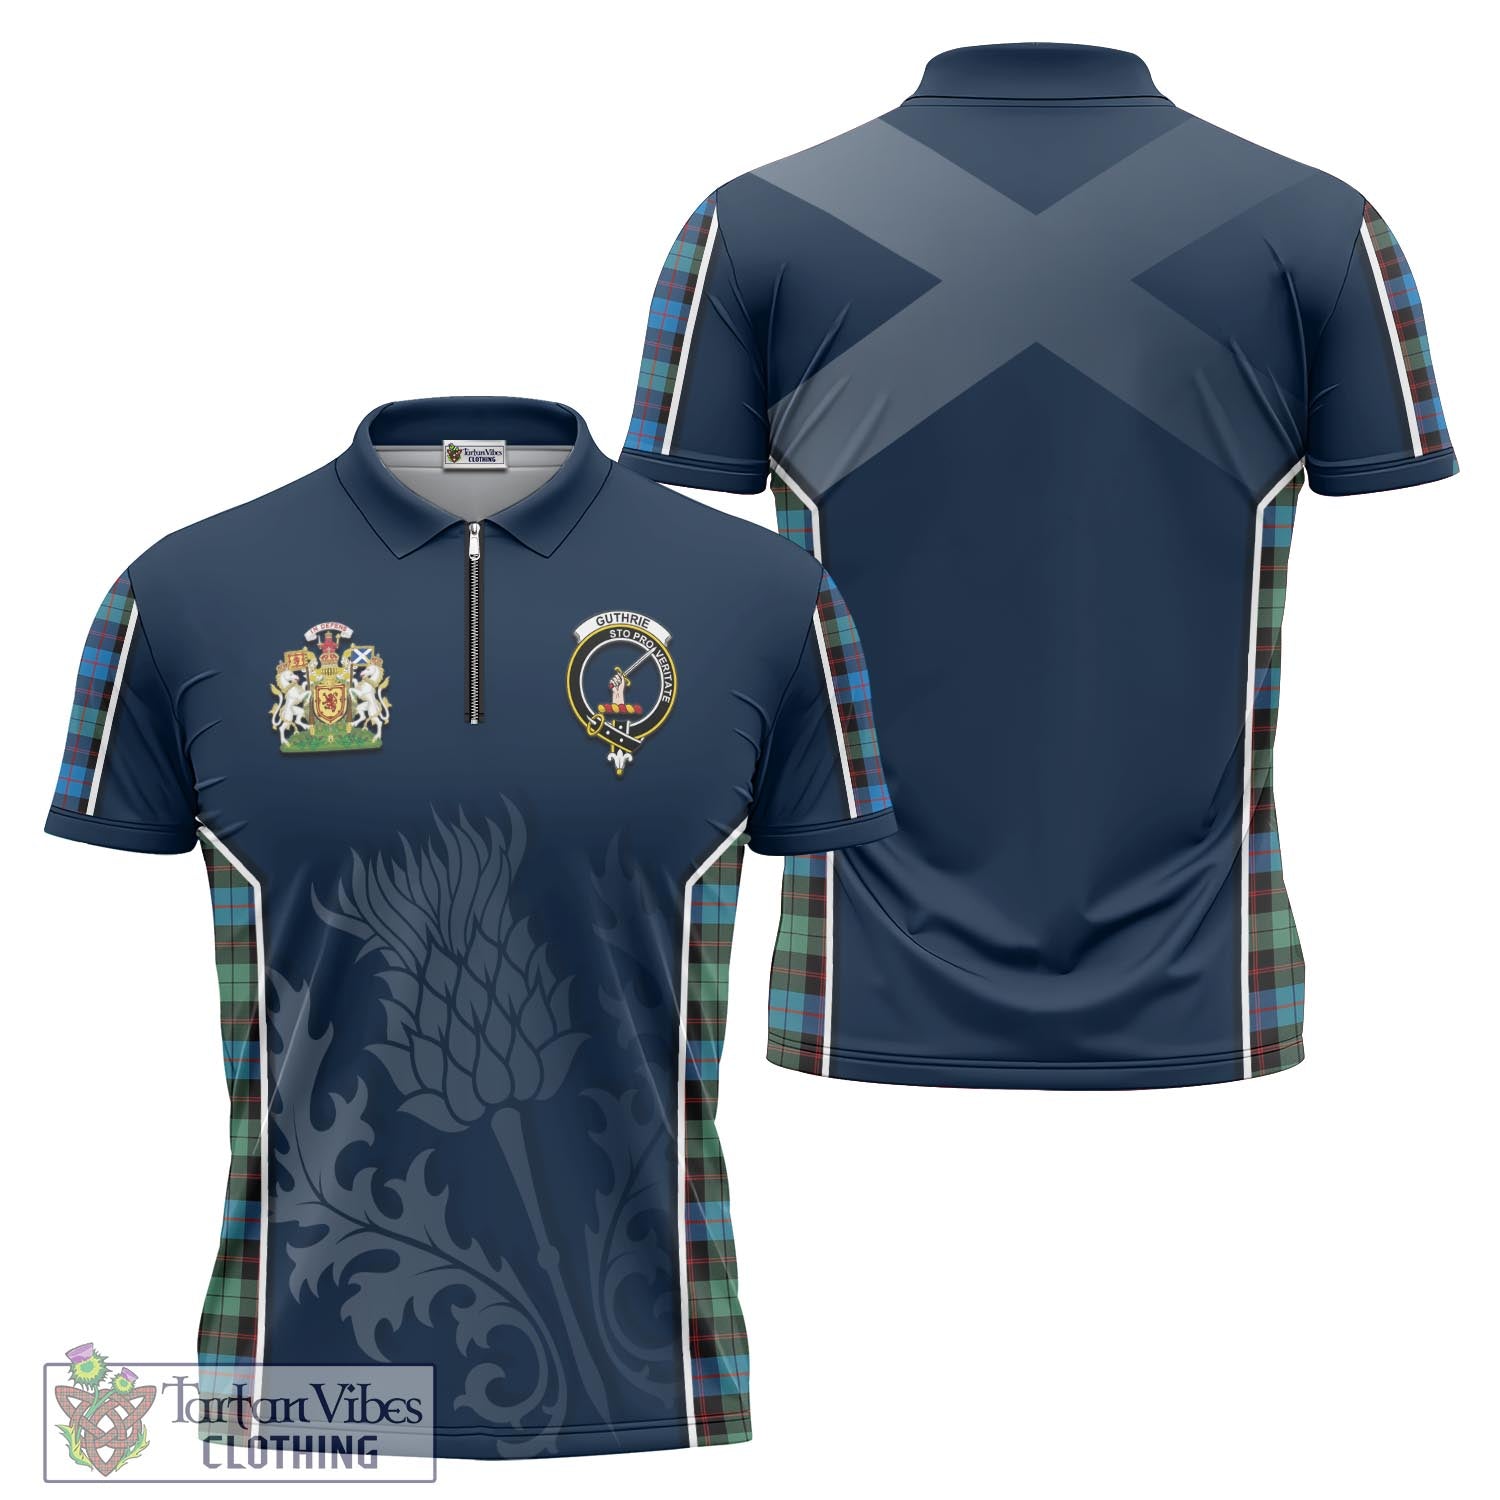 Tartan Vibes Clothing Guthrie Ancient Tartan Zipper Polo Shirt with Family Crest and Scottish Thistle Vibes Sport Style